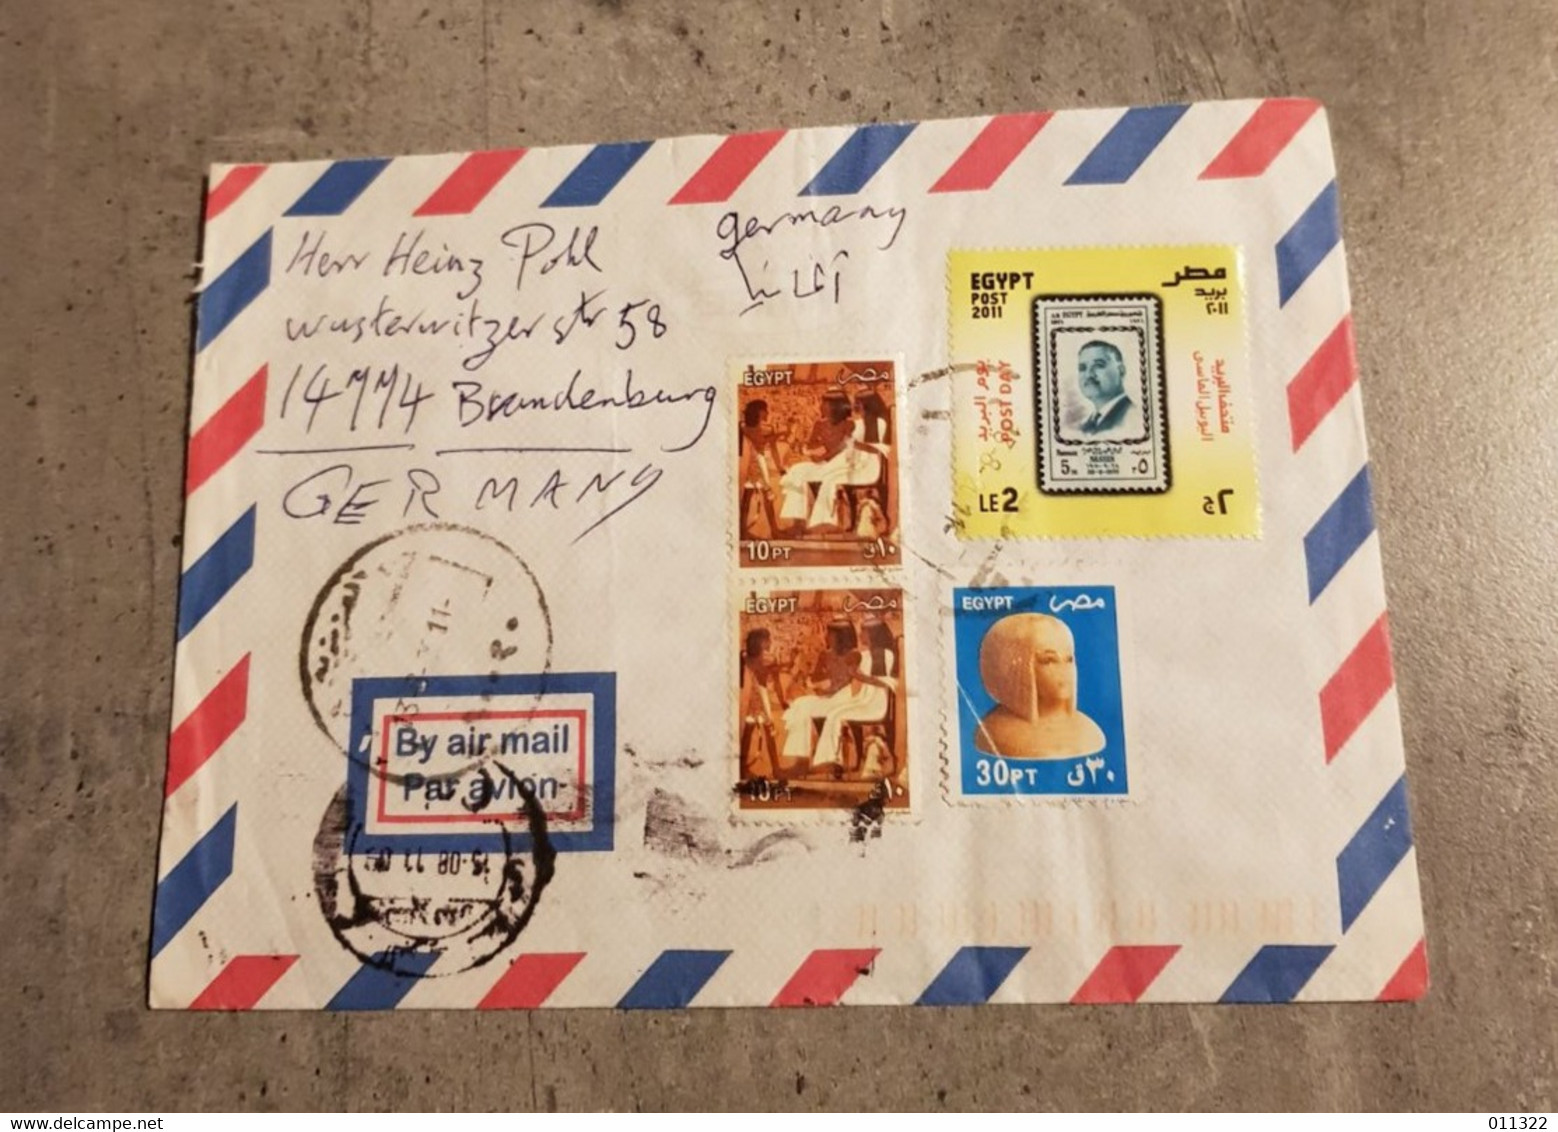 EGYPT COVER CIRCULED SEND TO GERMANY - Covers & Documents